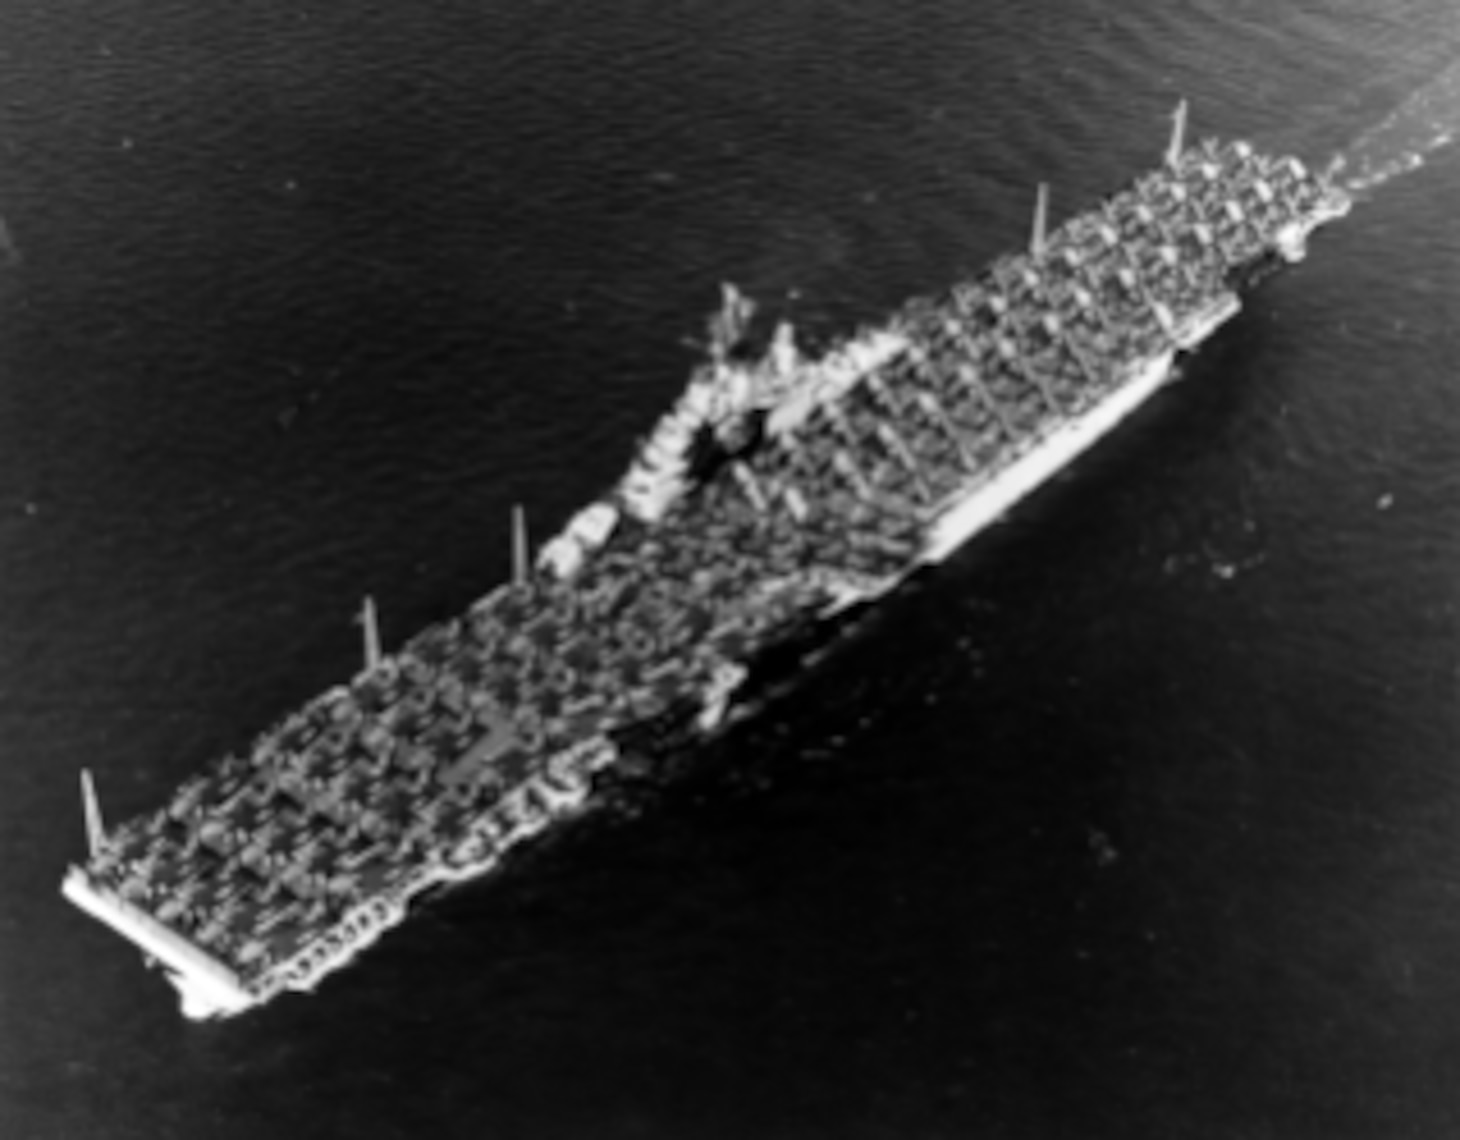 USS ESSEX (CV-9) At sea, with an overload of aircraft on her flight deck, 14 May 1944. She is carrying at least 36 TBF, 14 F6F and 70 SB2C type planes, probably to build up fleet stocks for the Marianas Operation.